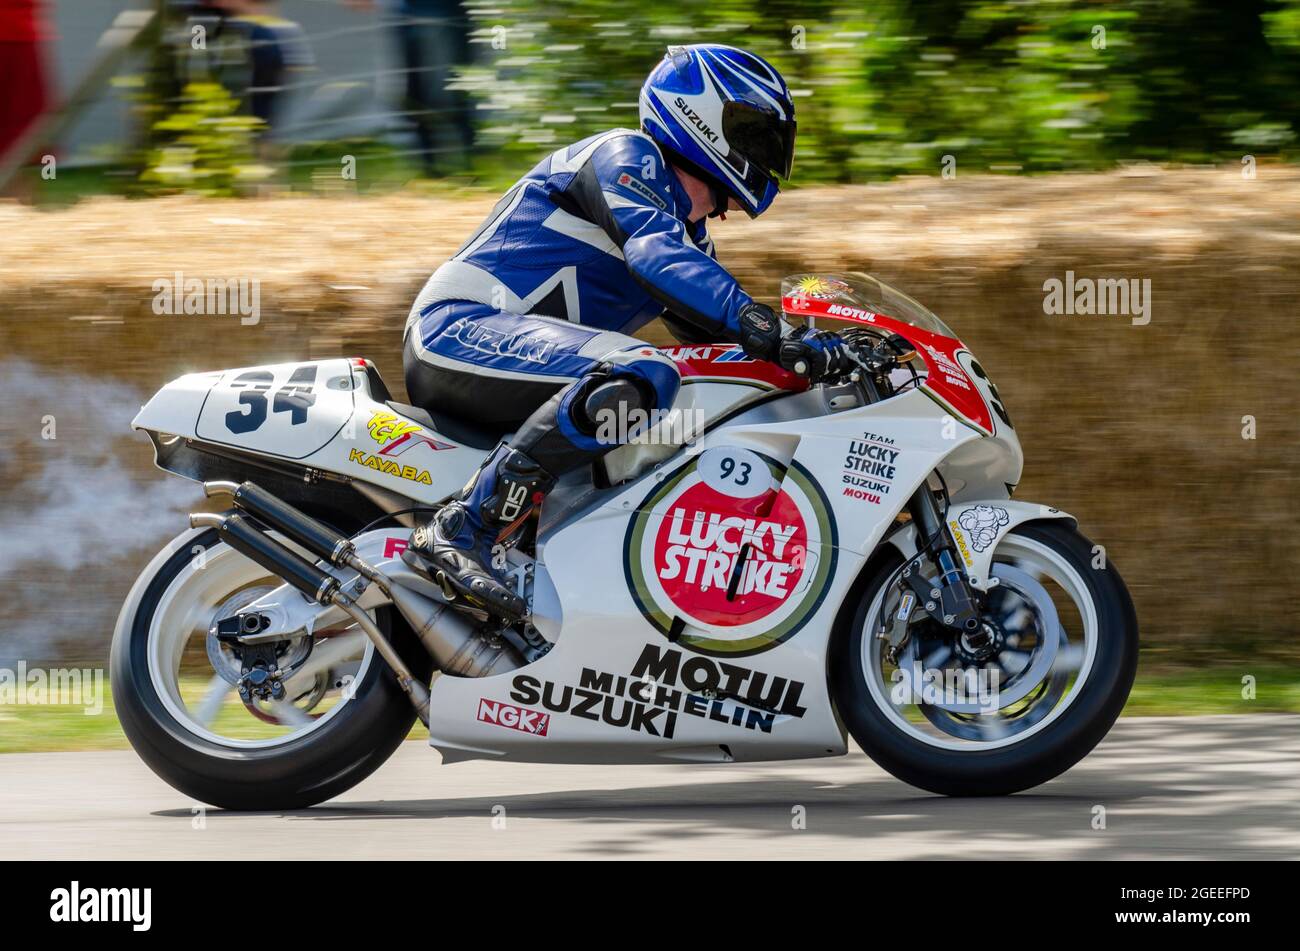 1993 Lucky Strike Suzuki RGV500 Grand Prix motorcycle racing up the hill climb track at the Goodwood Festival of Speed motor racing event 2014 Stock Photo